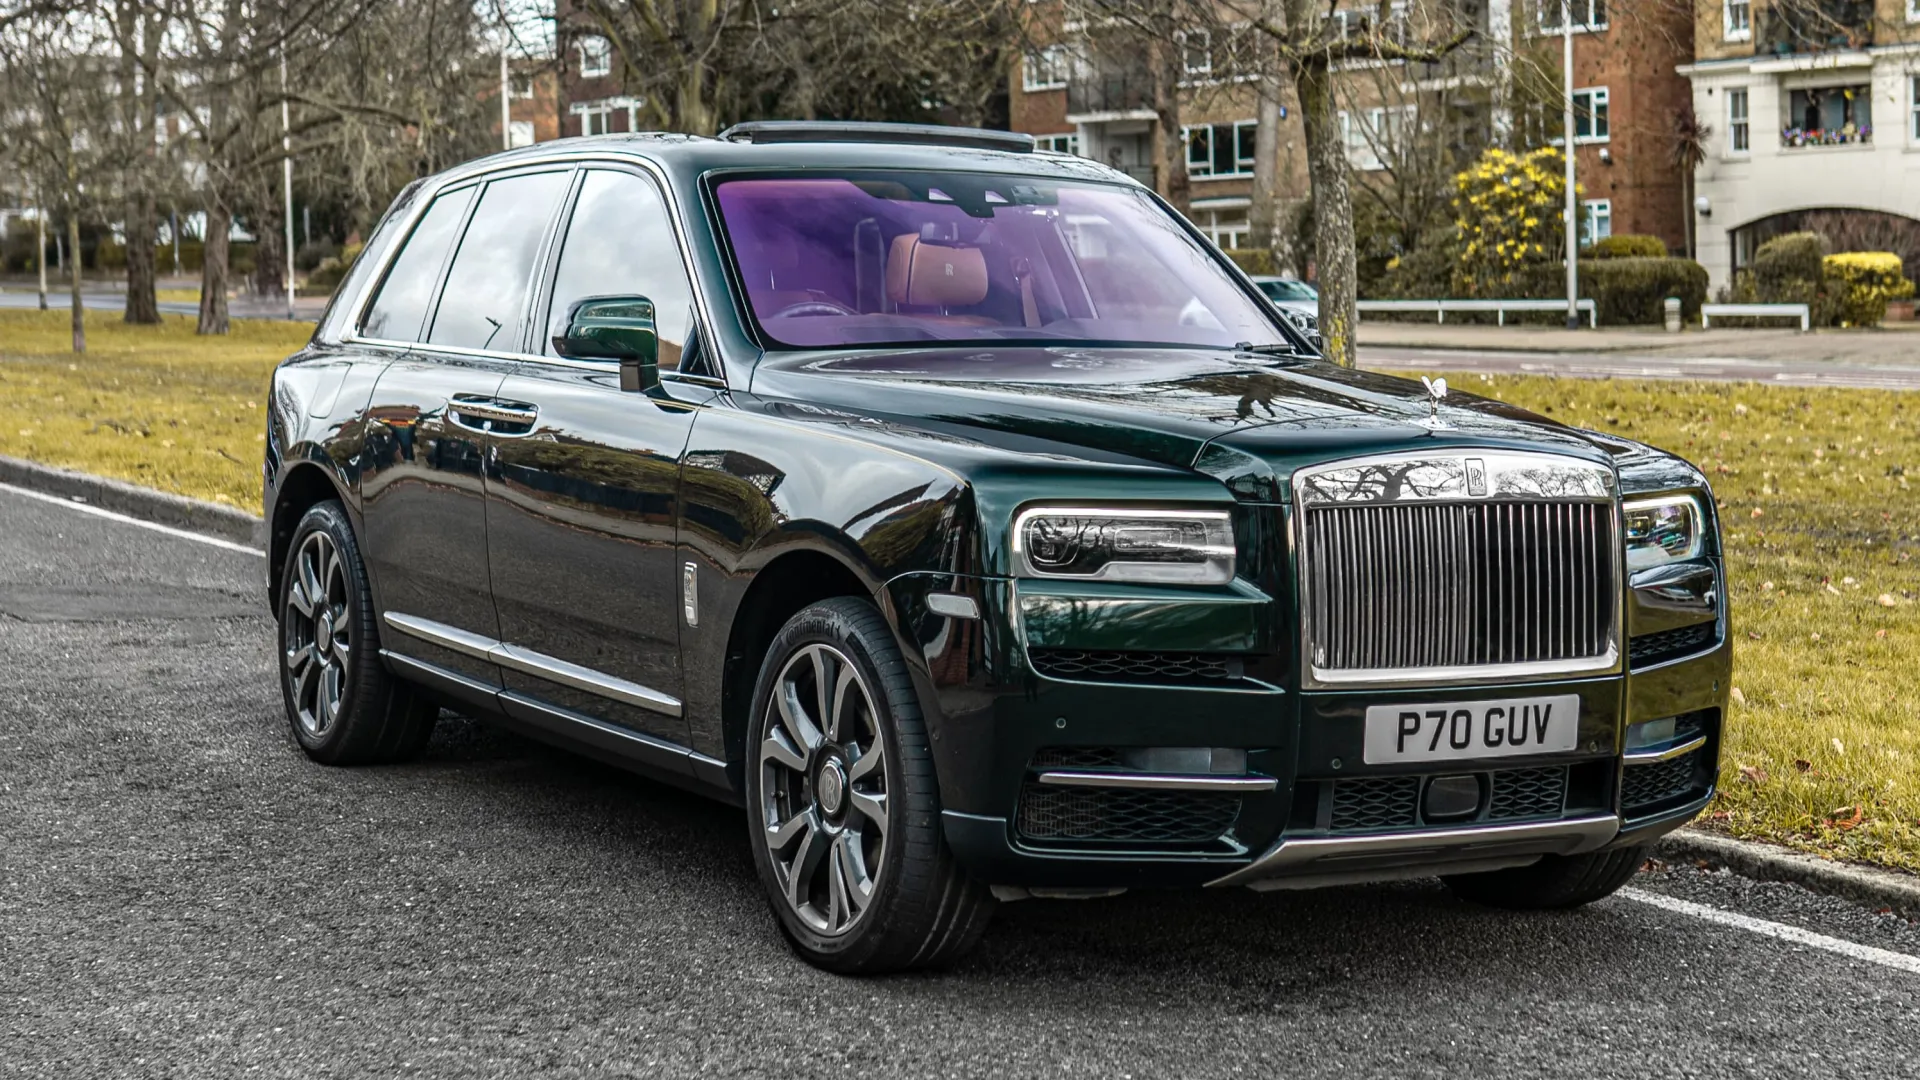 Dark Green Rolls-Royce cullinan right front view sitting in the street of london